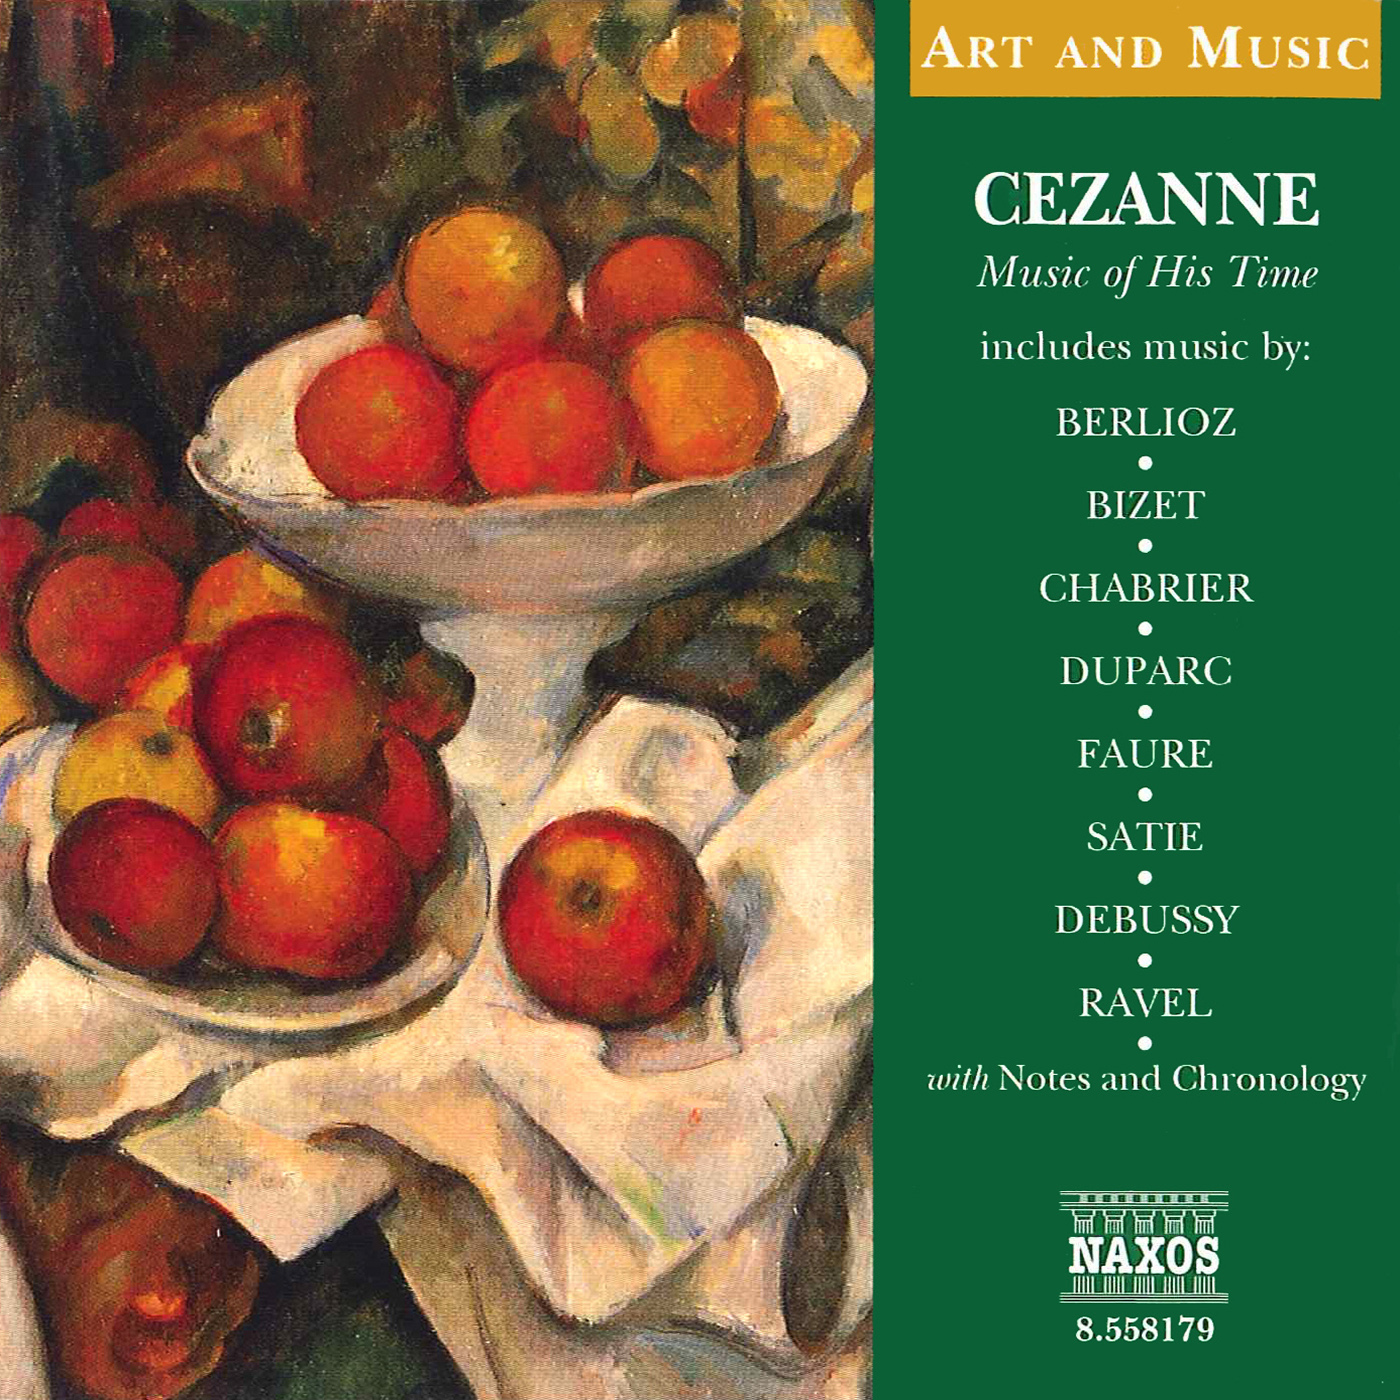 Art and Music: Cezanne - Music of His Time